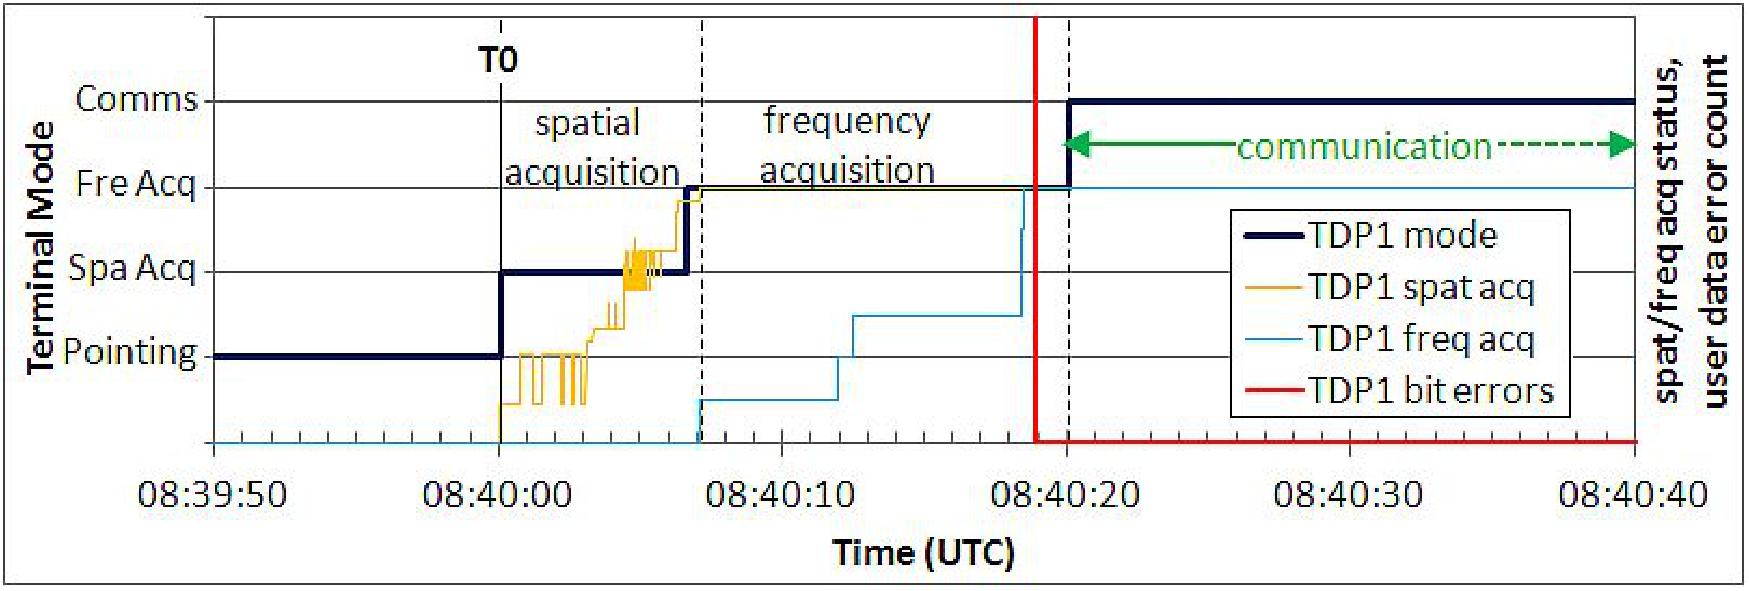 Figure 22: Acquisition within 20 s, spatial acquisition 7 s. TM recorded at 100 Hz sampling rate. Only TDP1 is shown (link performed on Aug. 18, 2015), (image credit: TDP1 collaboration, Ref. 31)